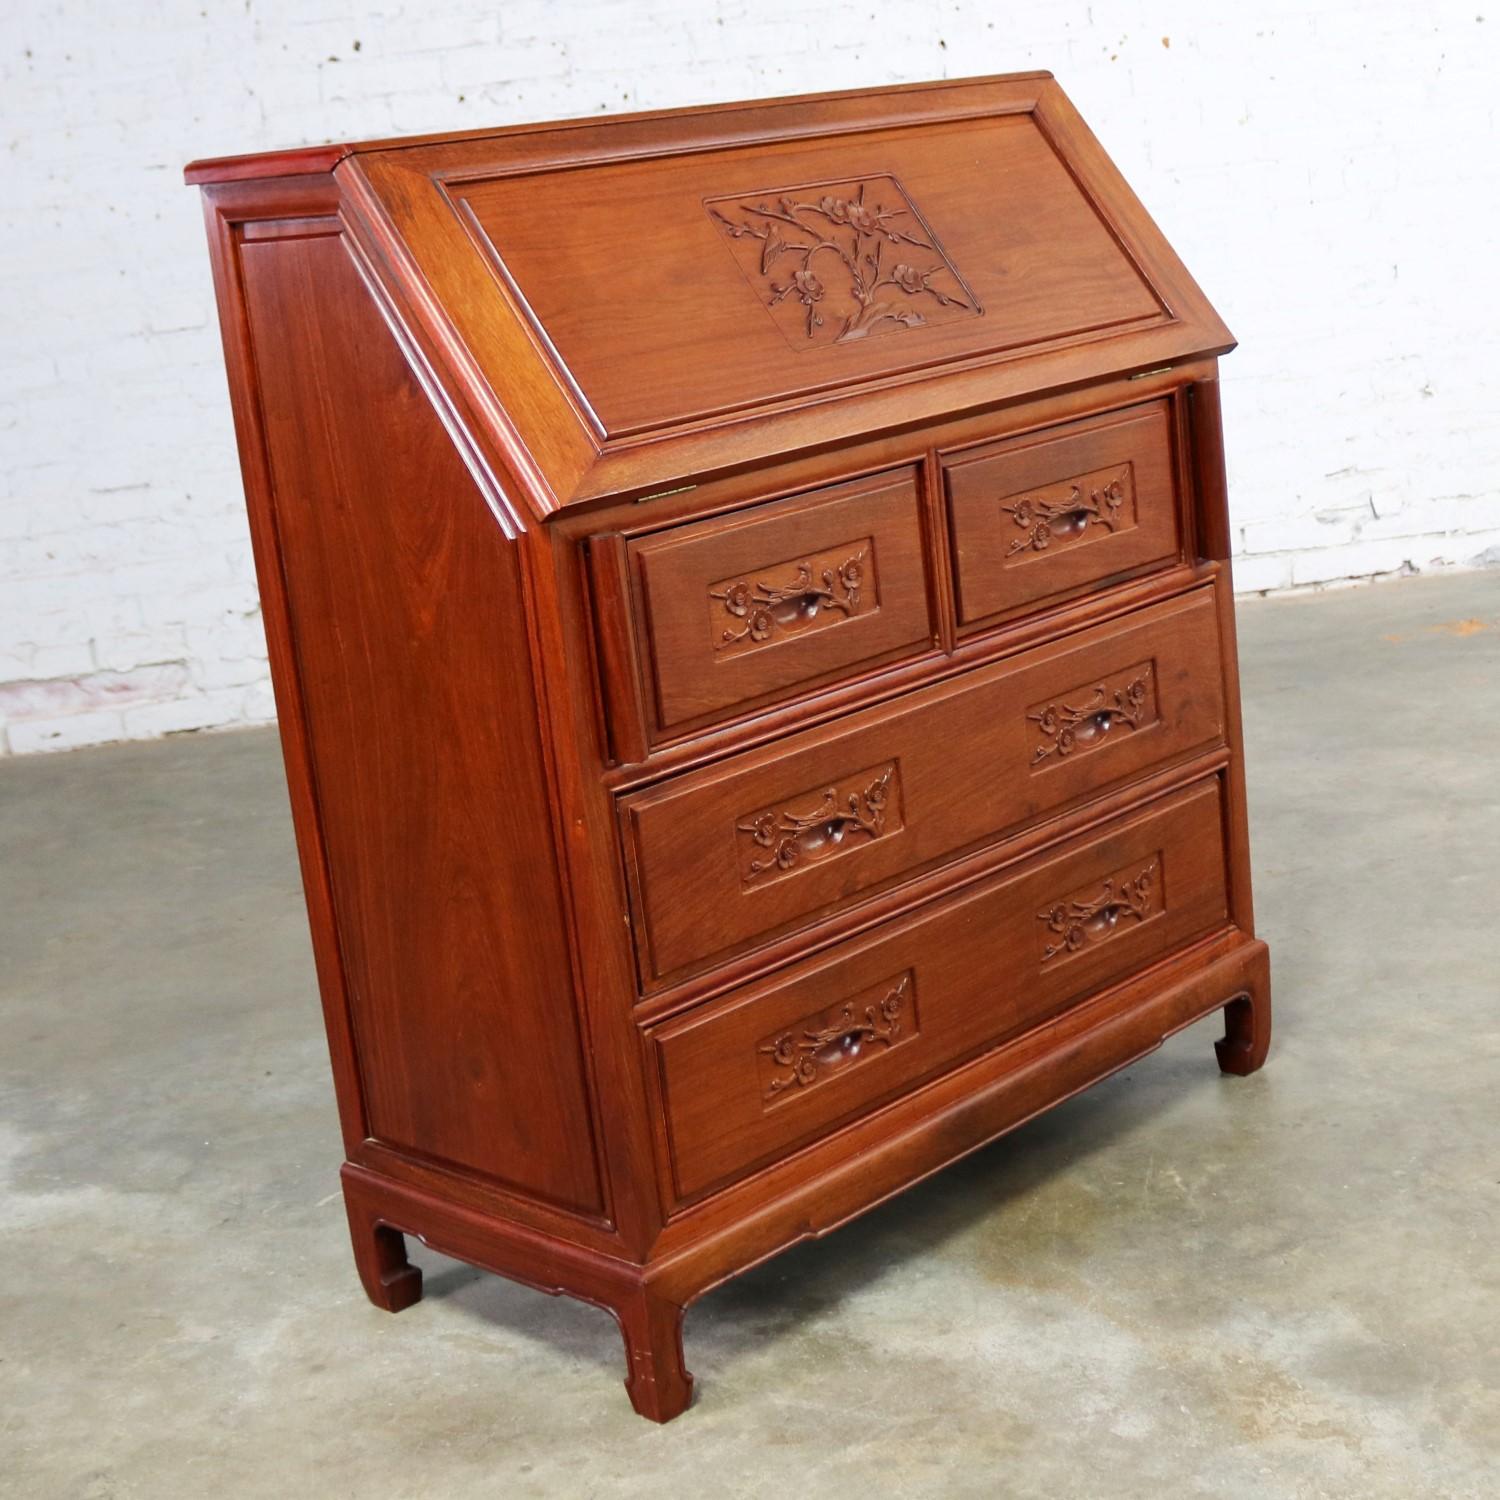 Handsome Asian teak hand carved drop slant front desk with interior compartmentalized cubby storage in the style of George Zee and Co. of China. This amazing piece is in fabulous condition. Please see photos, circa mid-20th century.

This